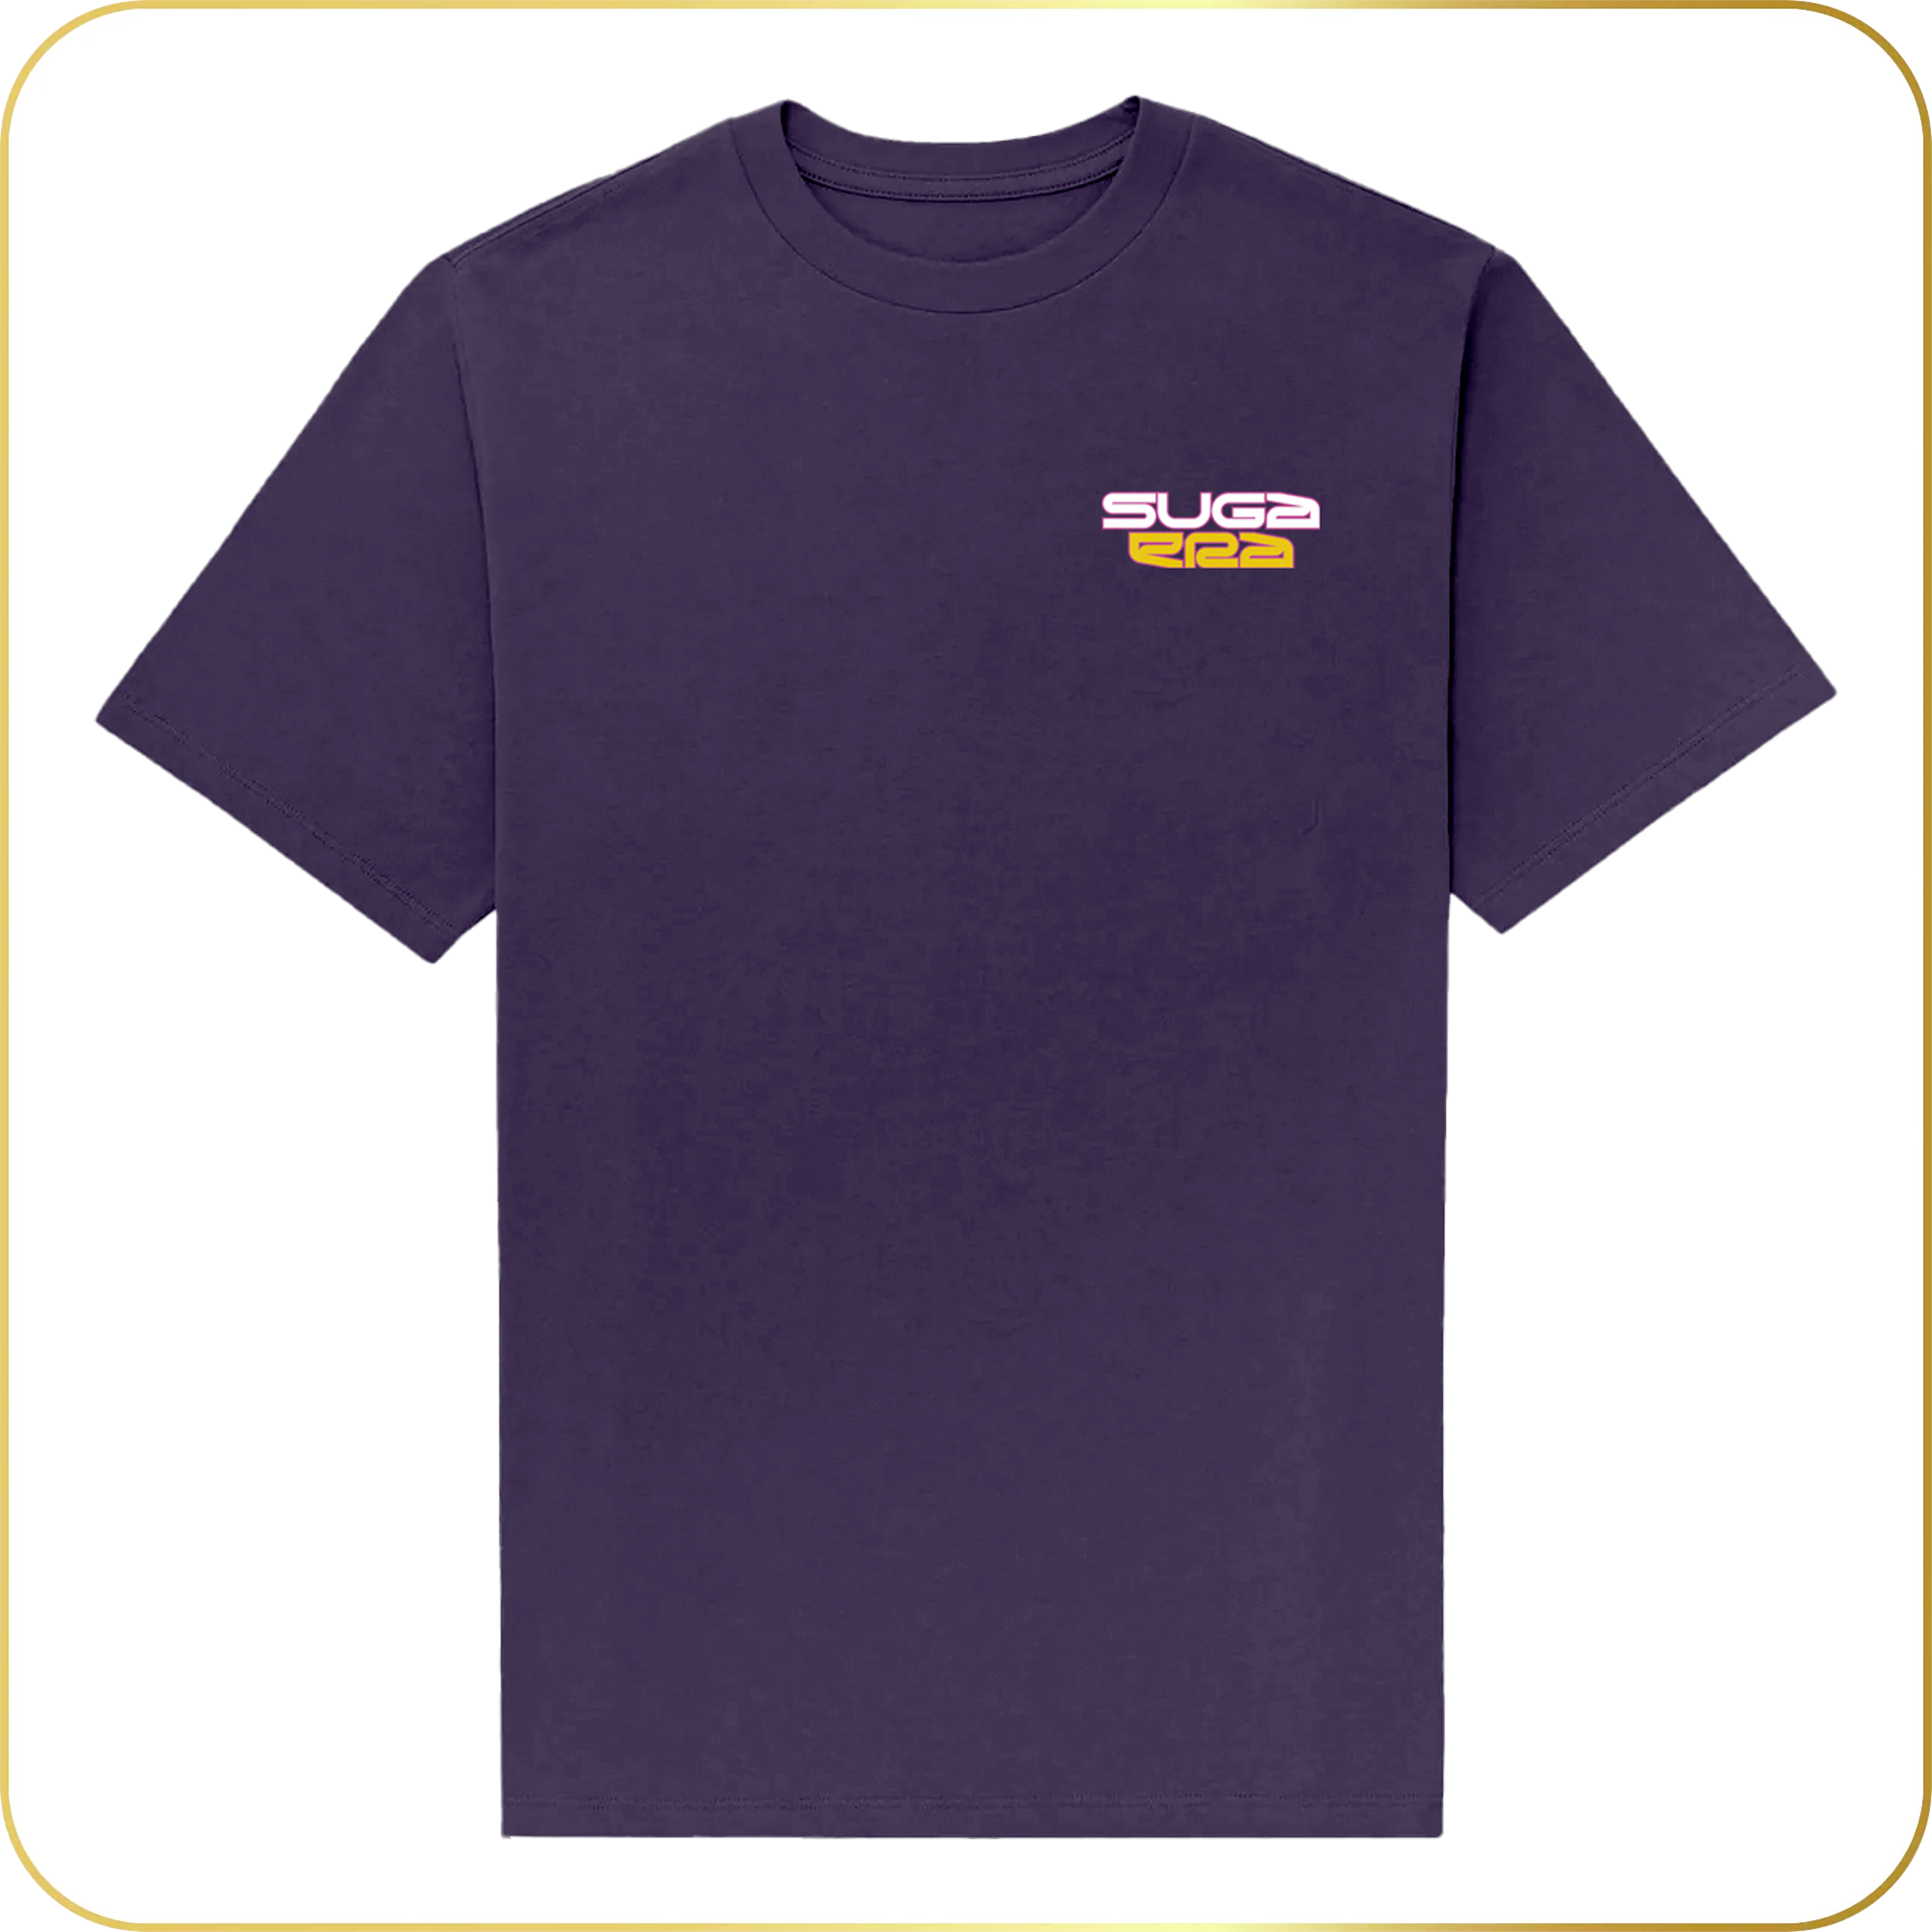 The Reign Remains Purple Tee